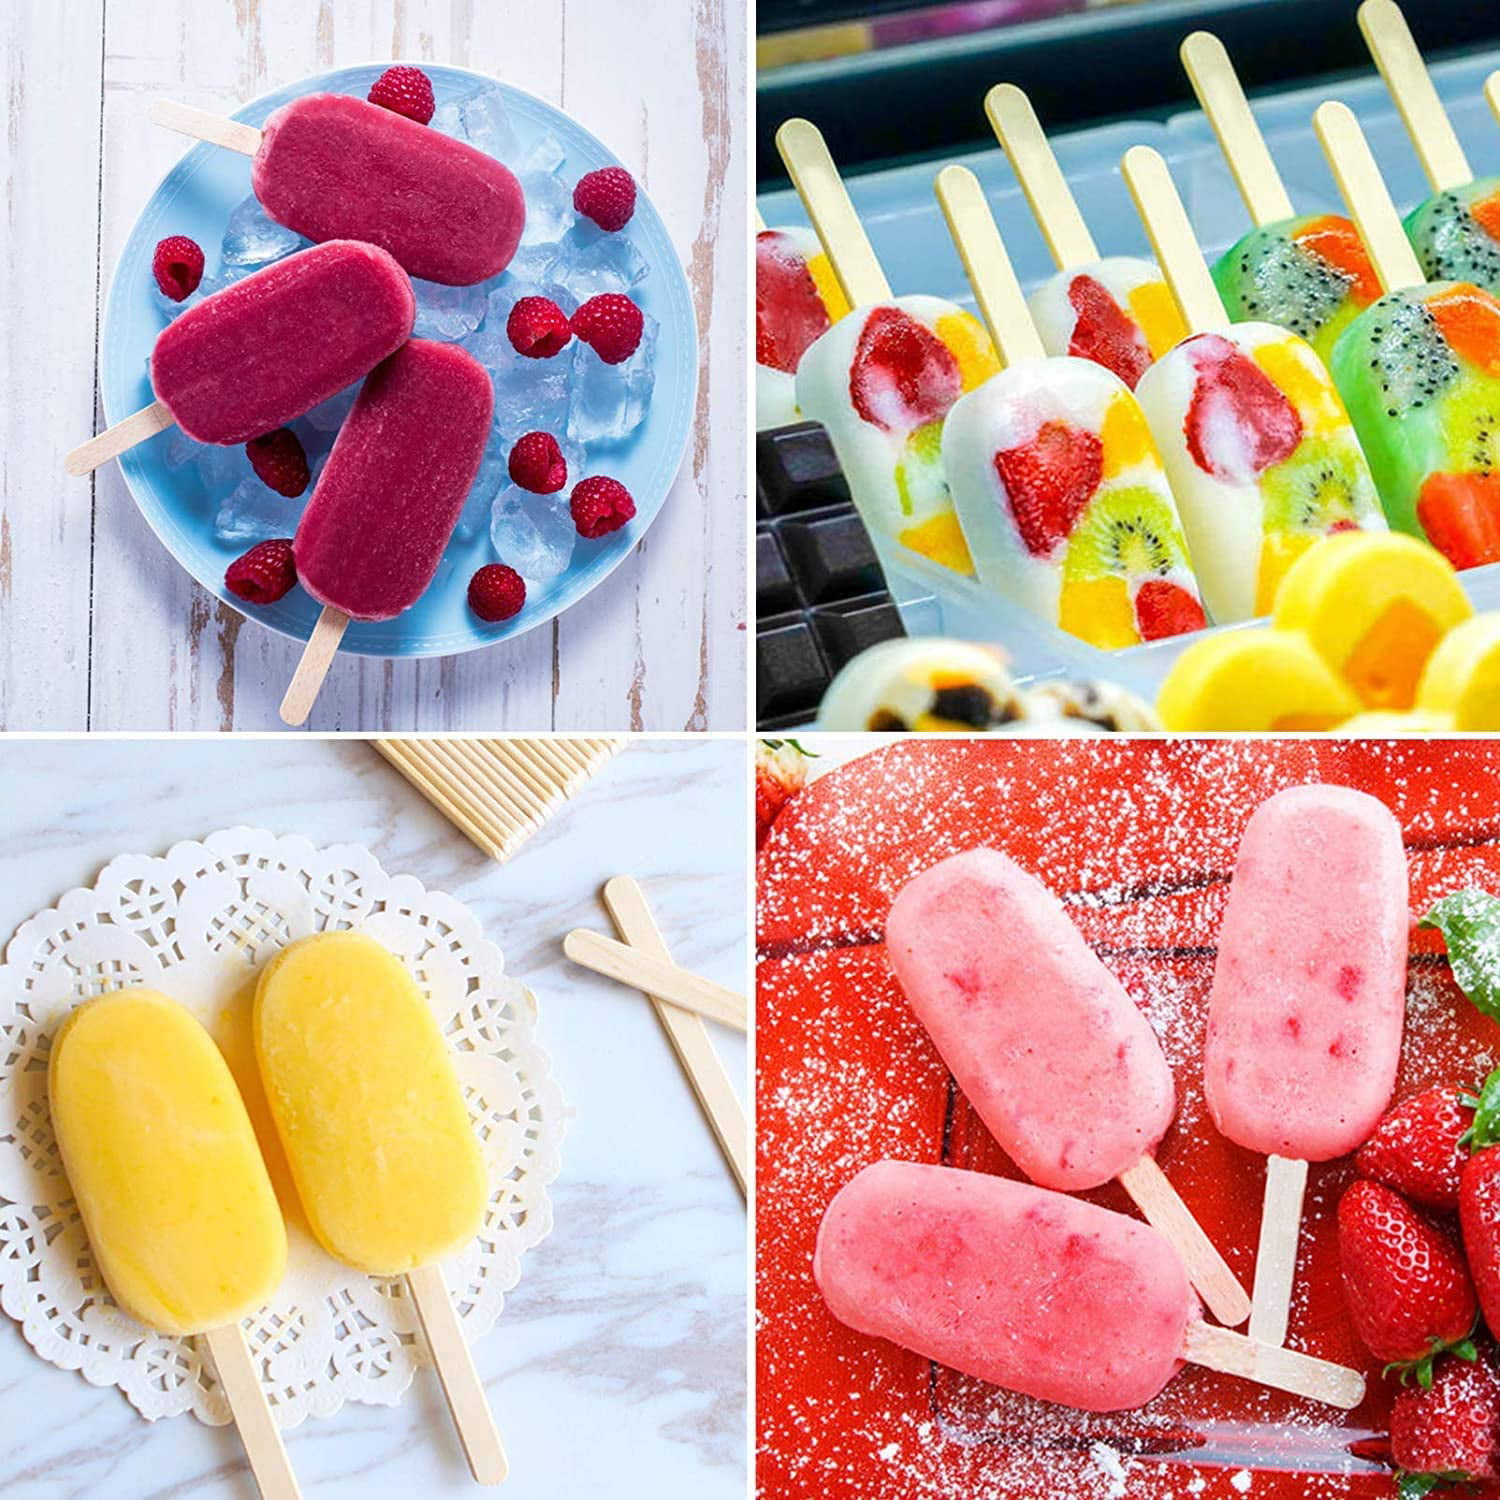 Easy Release BPA Free Ice Cream Mold for Kids TYP1 Silicone Popsicle Molds Ice Pop Molds Reusable Cake Pop Mold Set with Lid Popsicle Sticks 